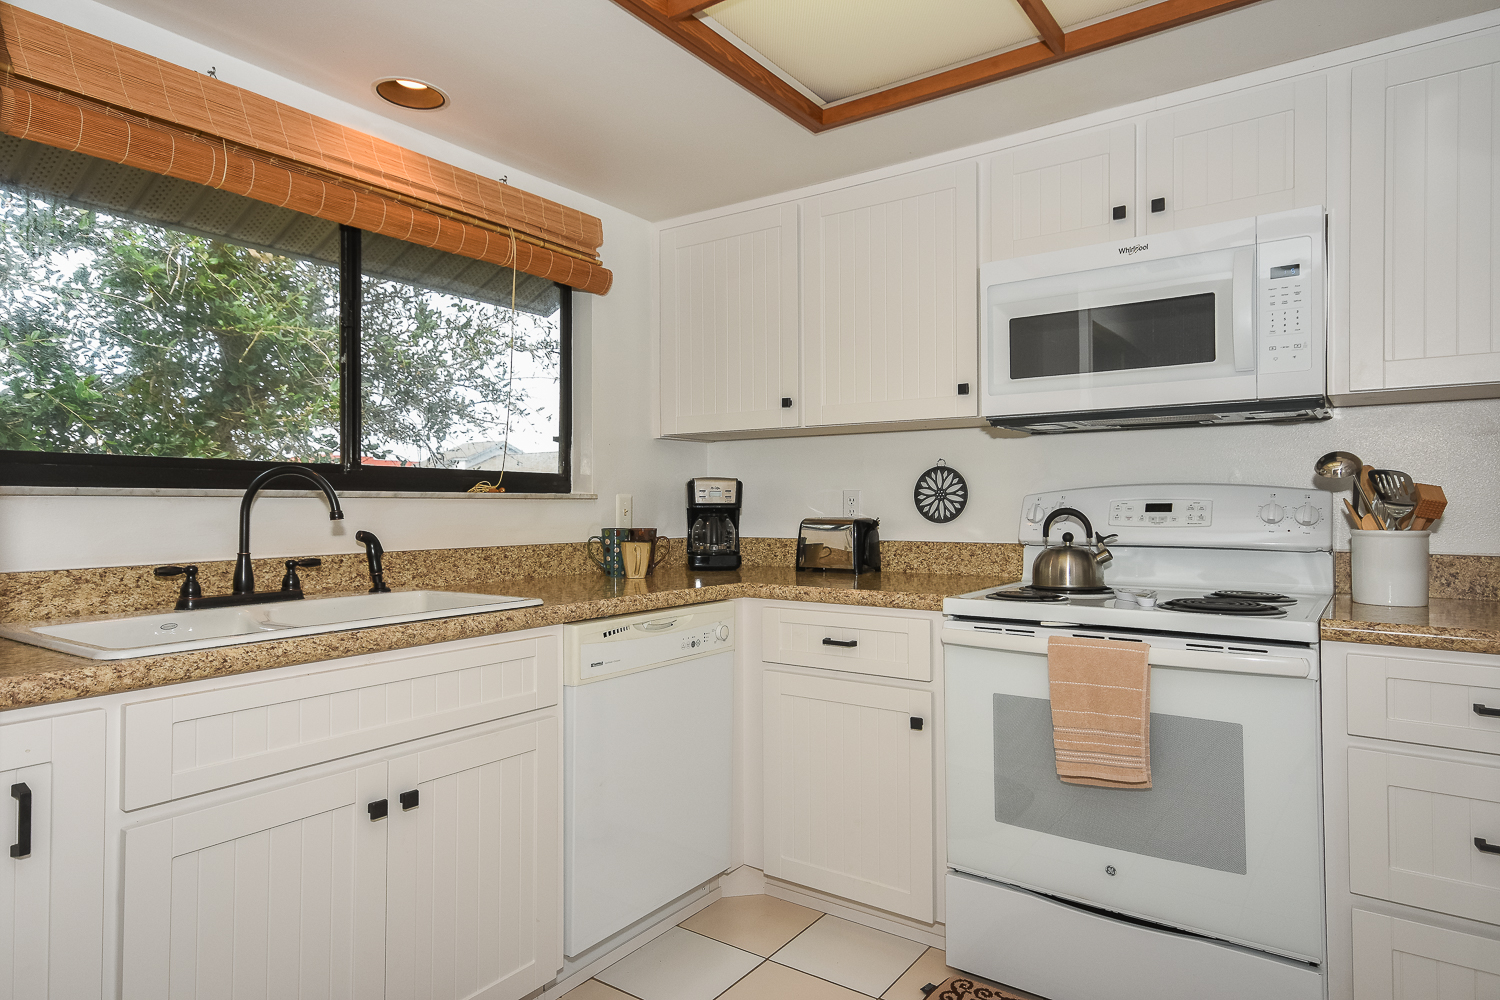 Fully equipped kitchen with everything you'll need to prepare your favorite island treat.